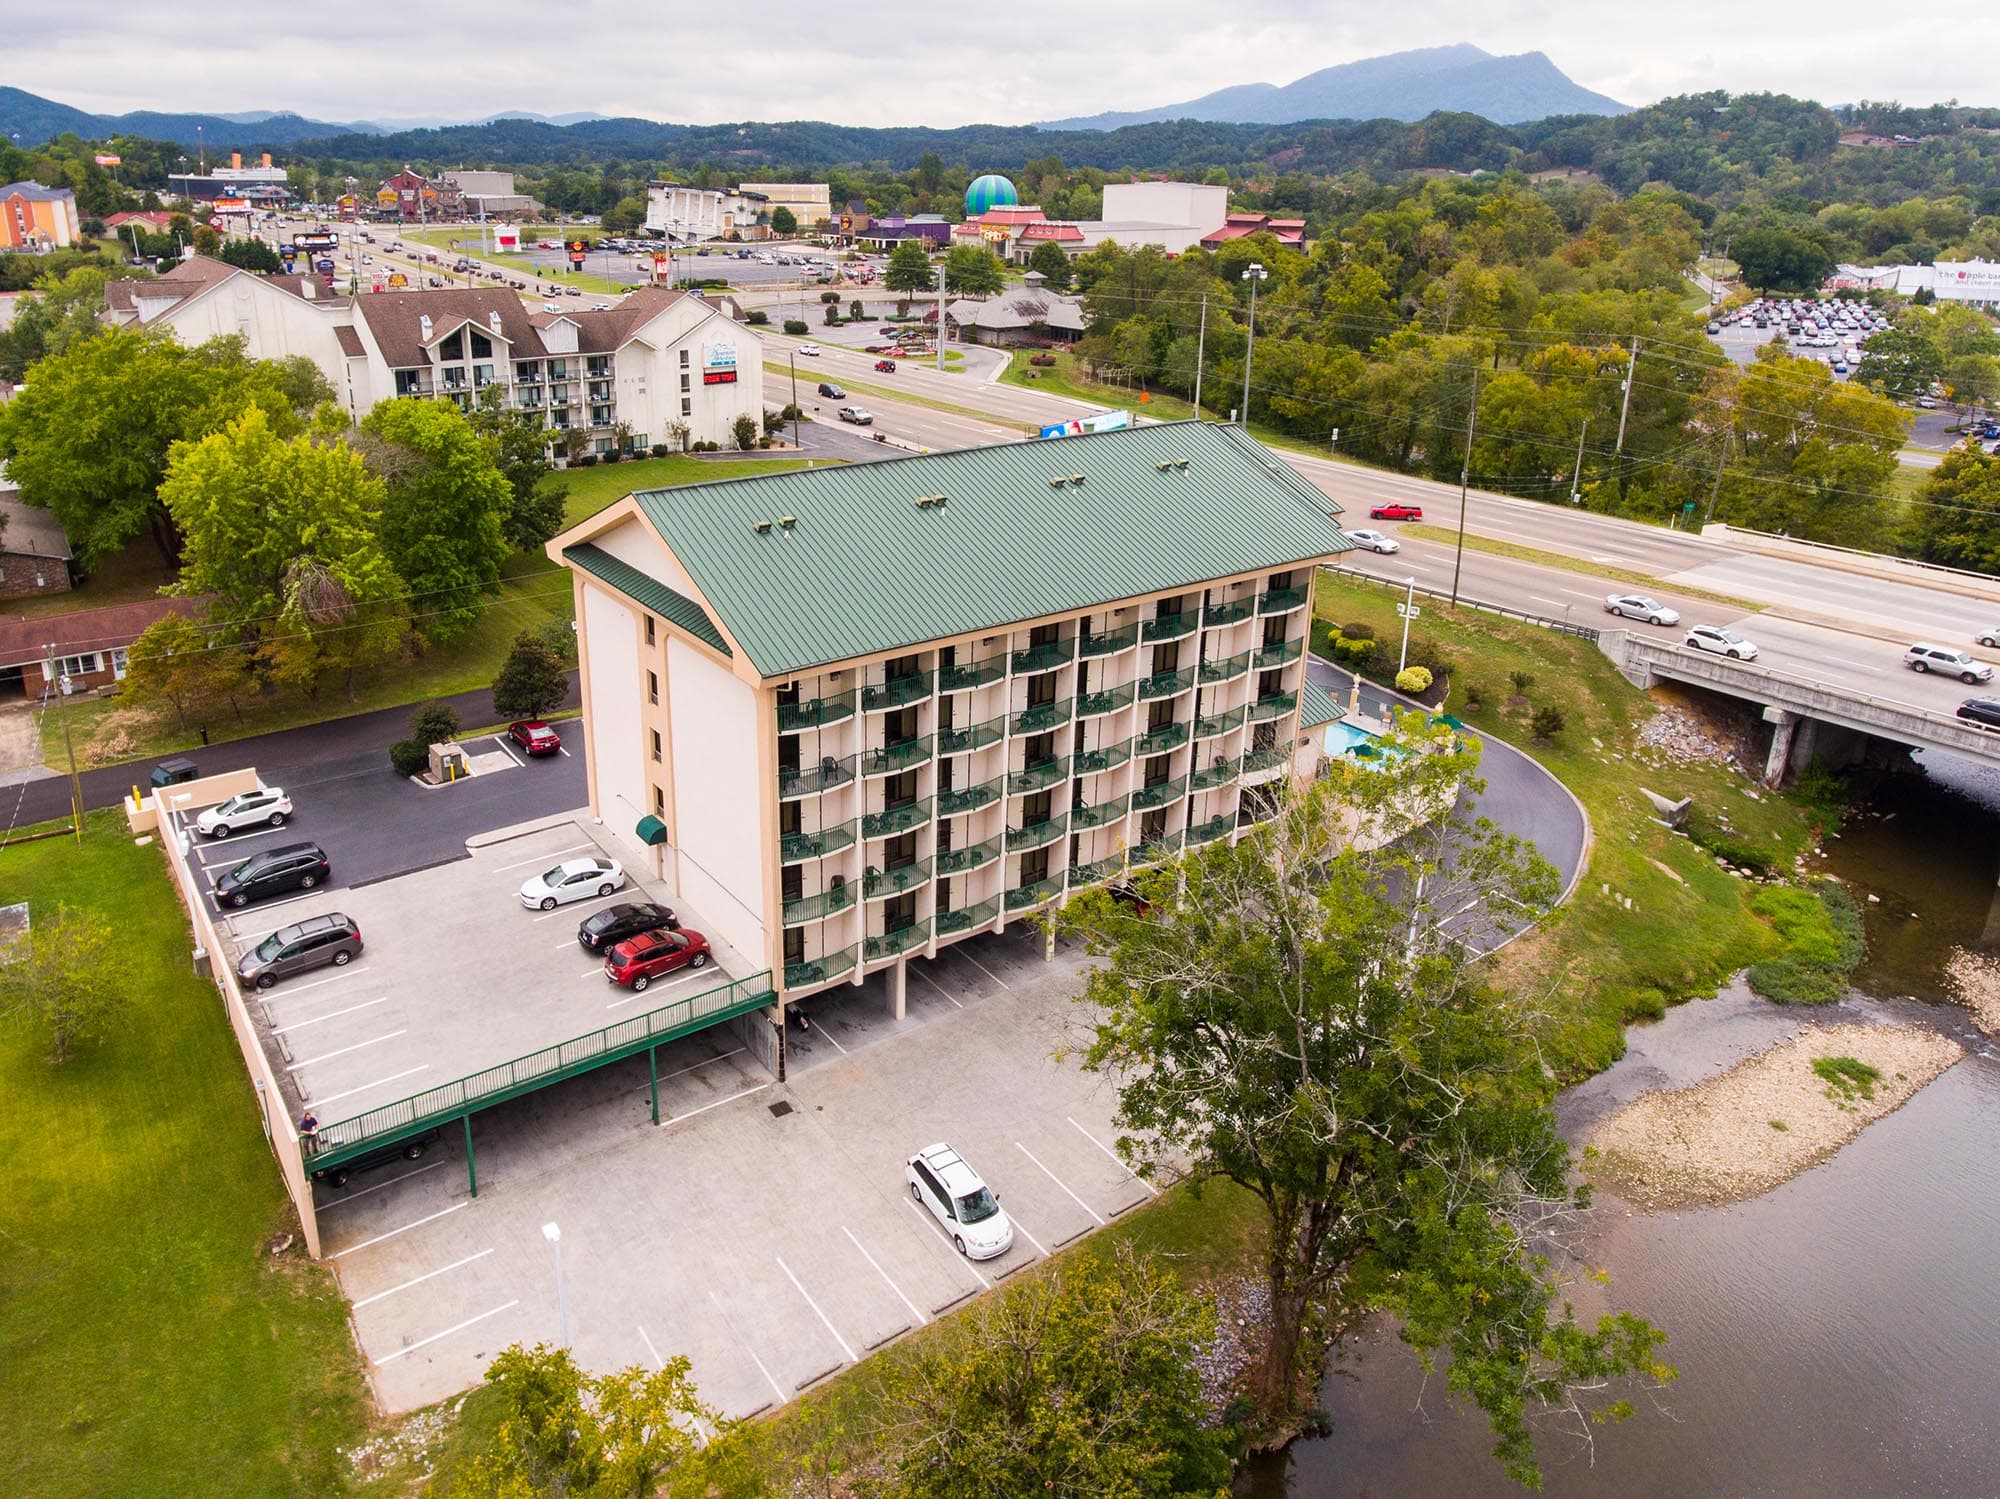 Drone image of hotel beside main road